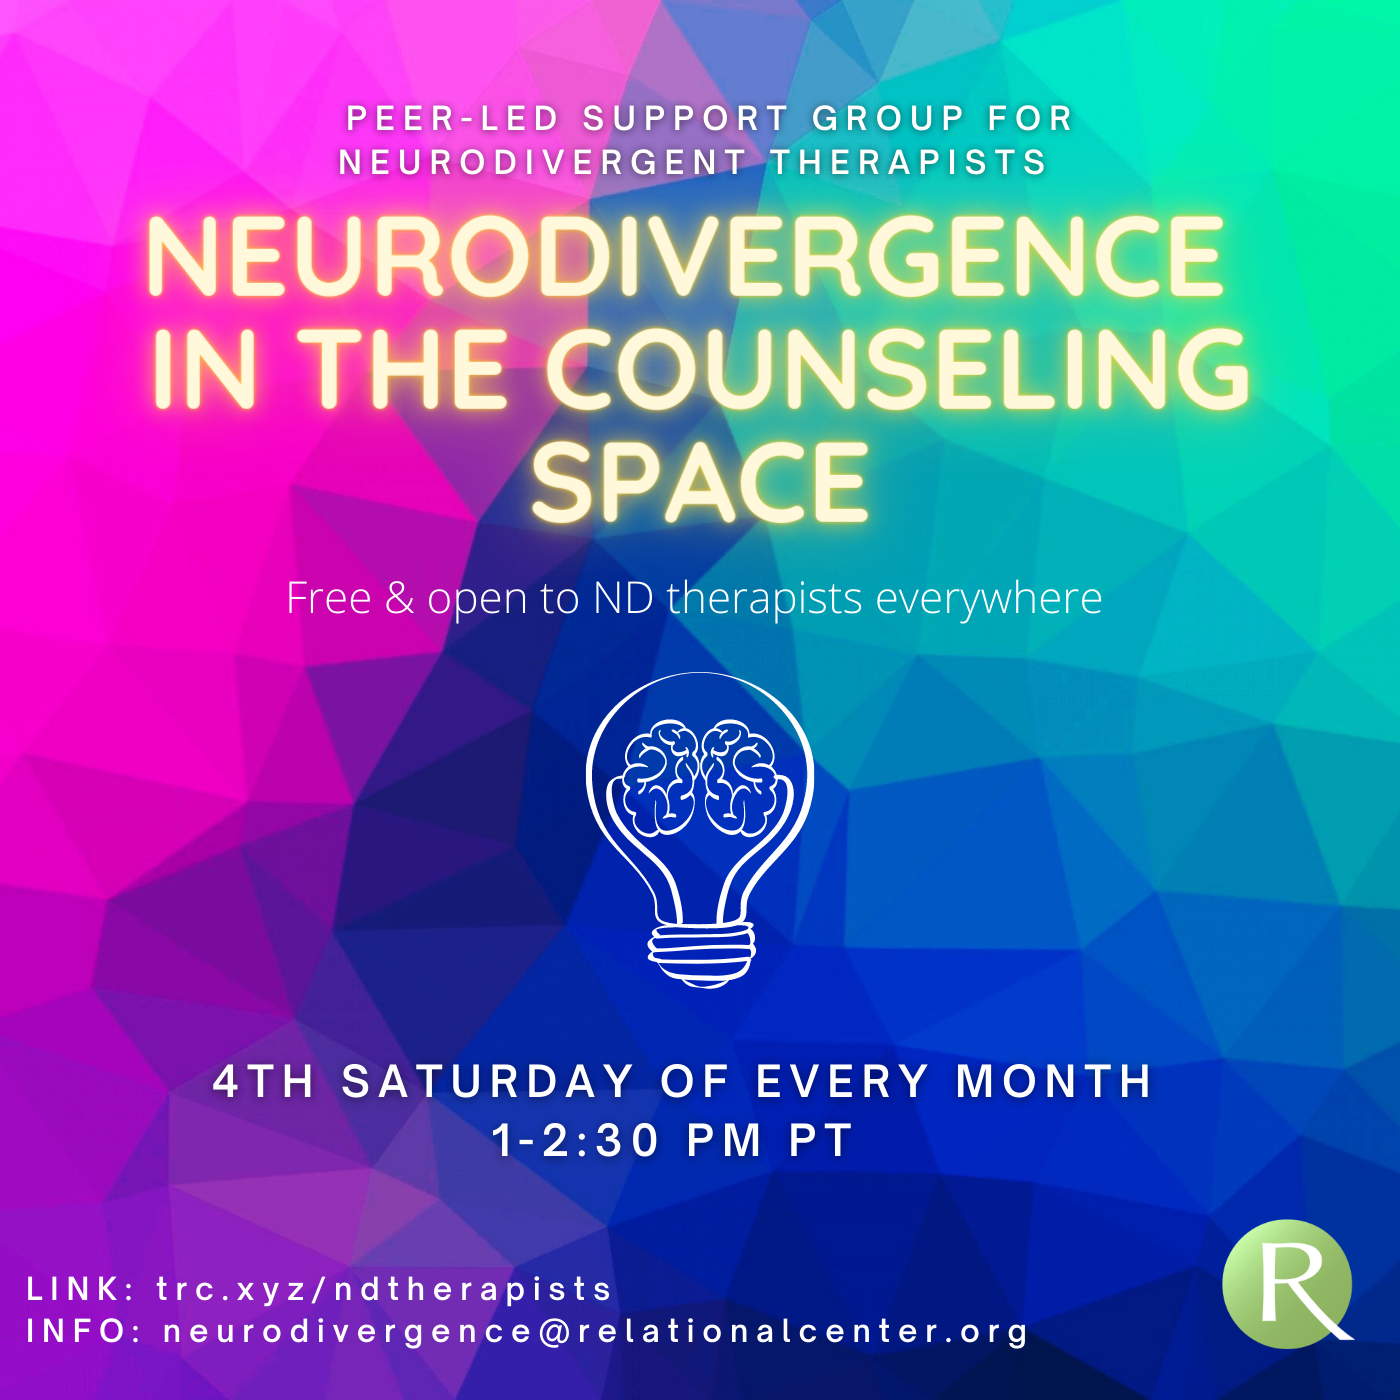 Neurodivergence in the Counseling Space